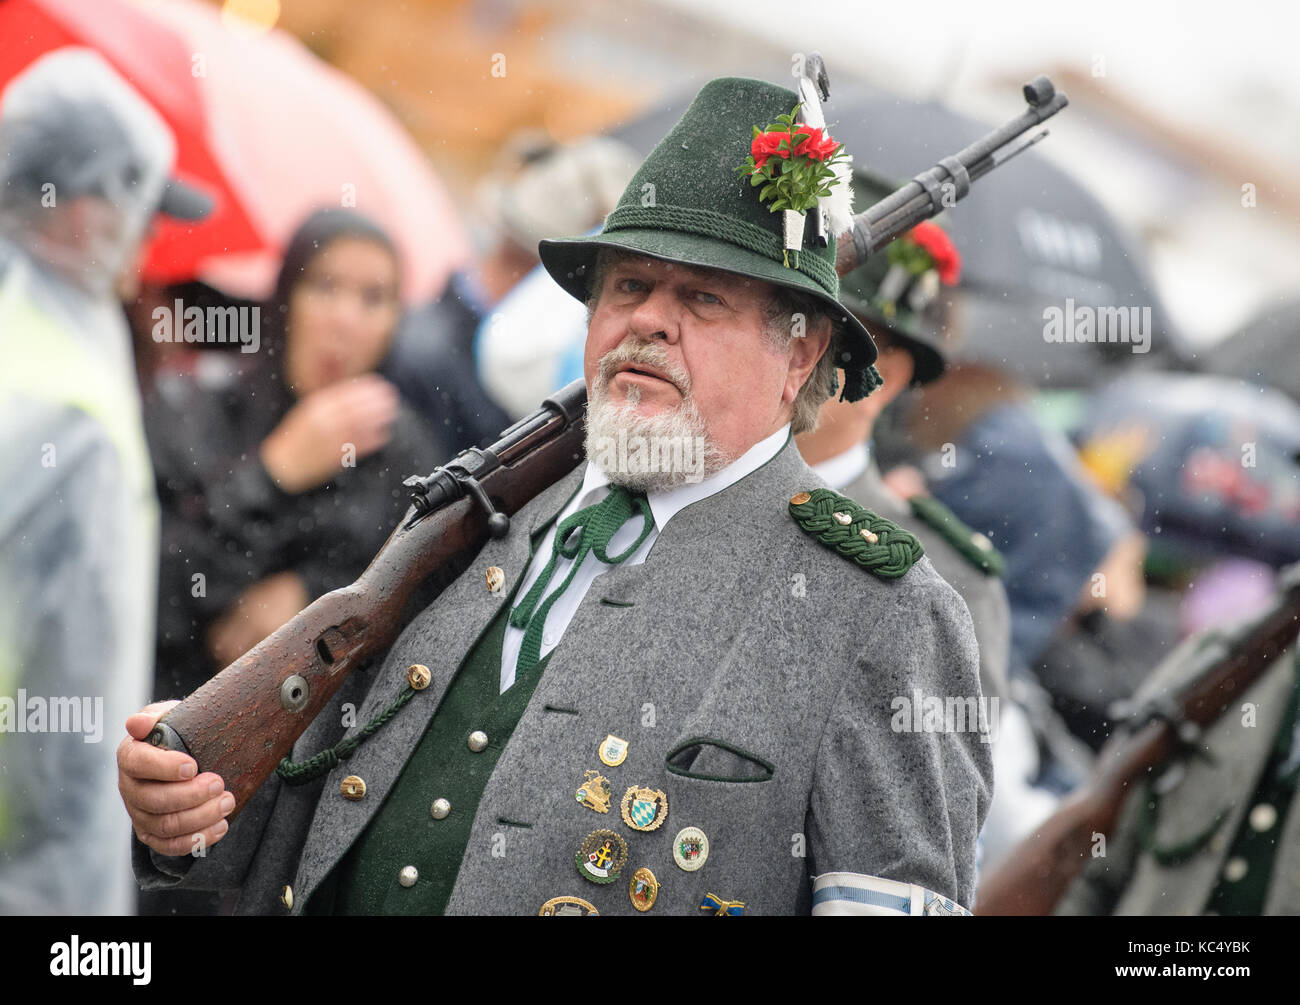 Munich, Germany. 03rd Oct, 2017. Gun shooters arrive at the Bavaria at the Oktoberfest fun fair on the Theresienwiese meadow in Munich, Germany, 03 October 2017. After 18 days, the 184th Oktoberfest ends on 03 October 2017. Credit: Matthias Balk/dpa/Alamy Live News Stock Photo